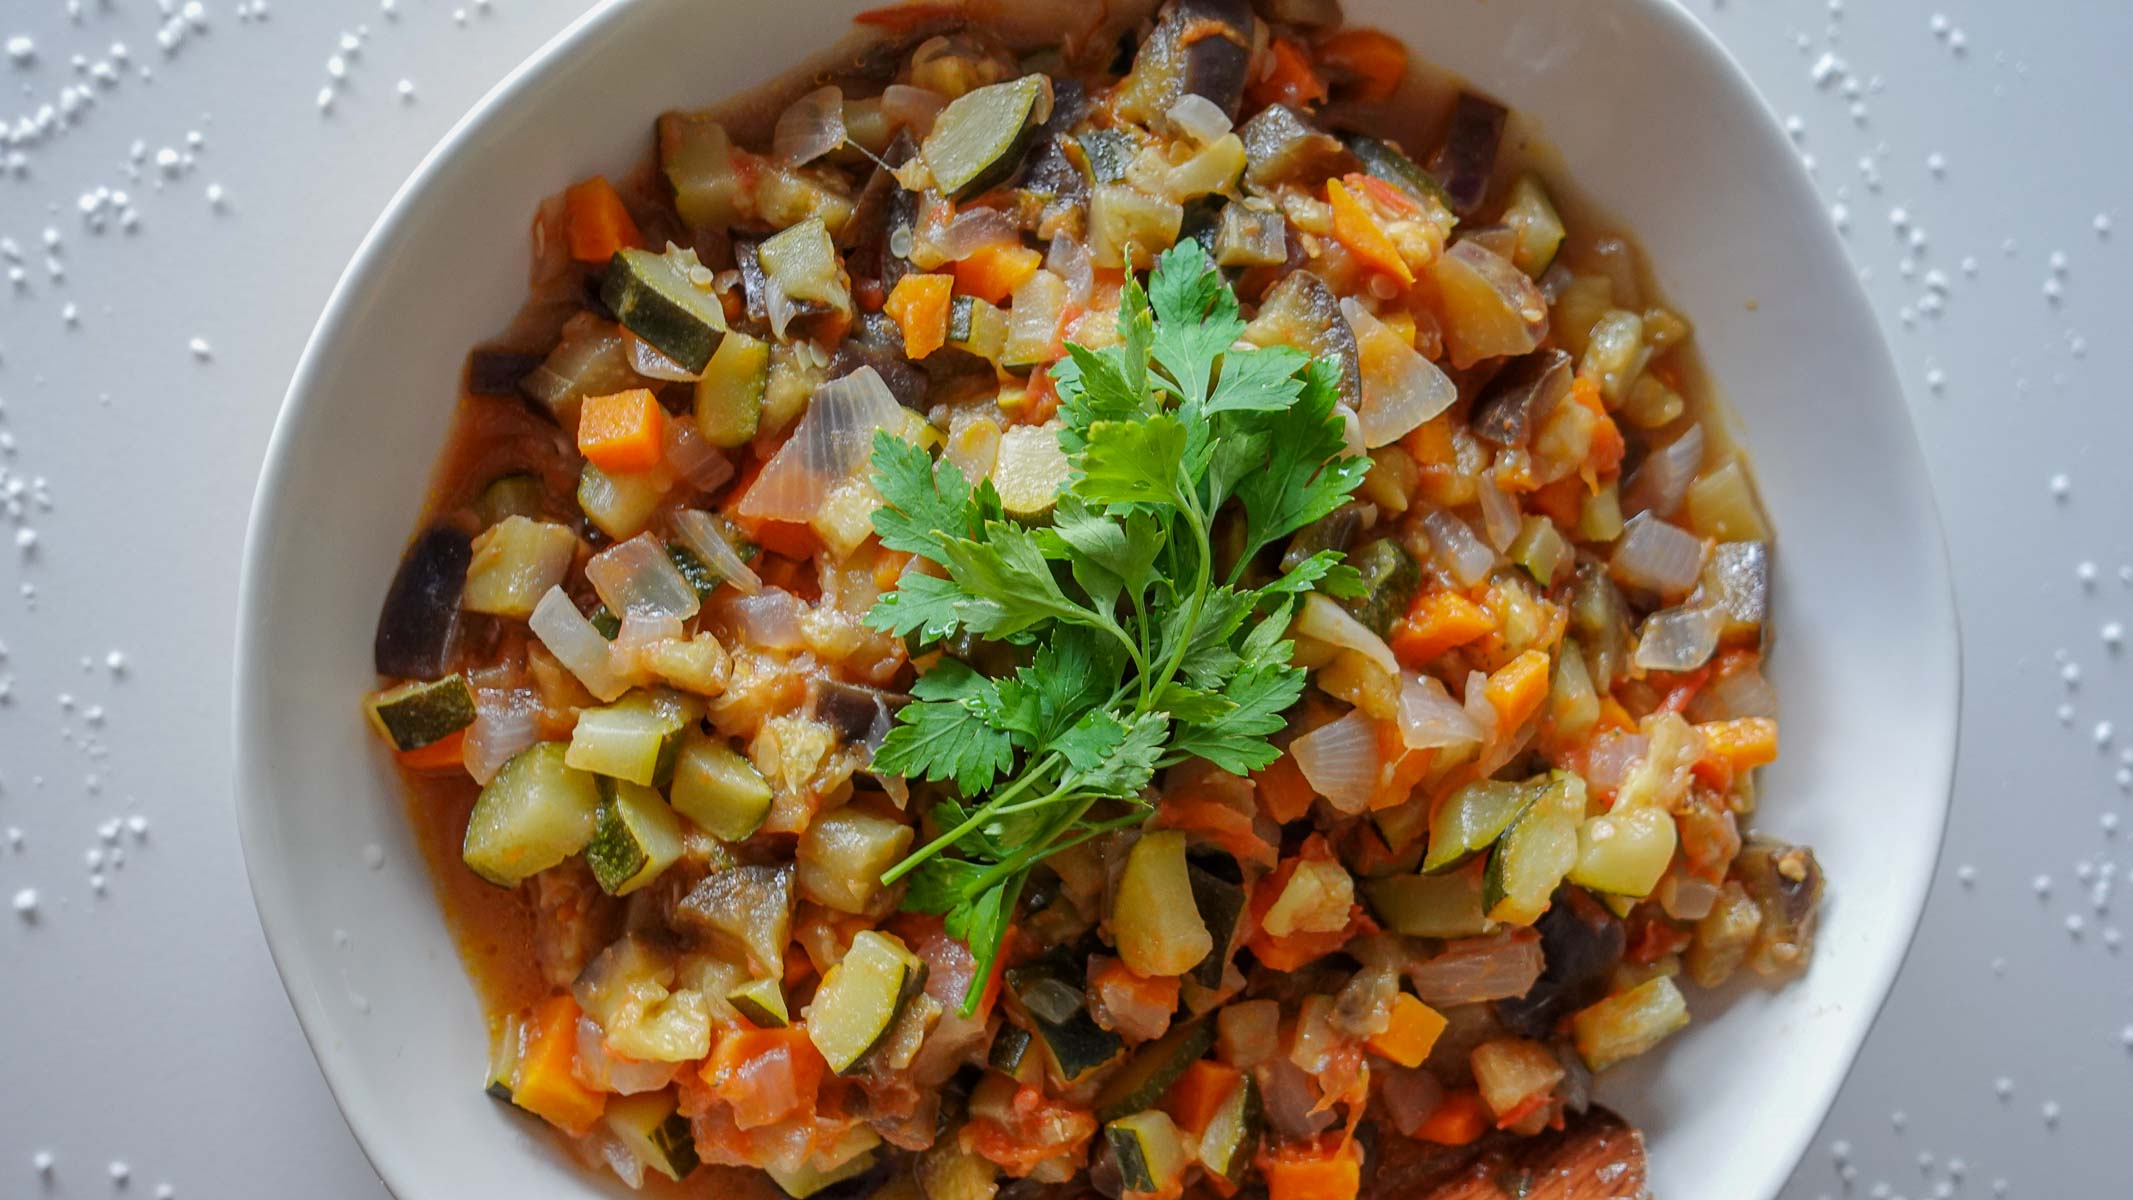 Delicious Vegetable Ragout in a bowl